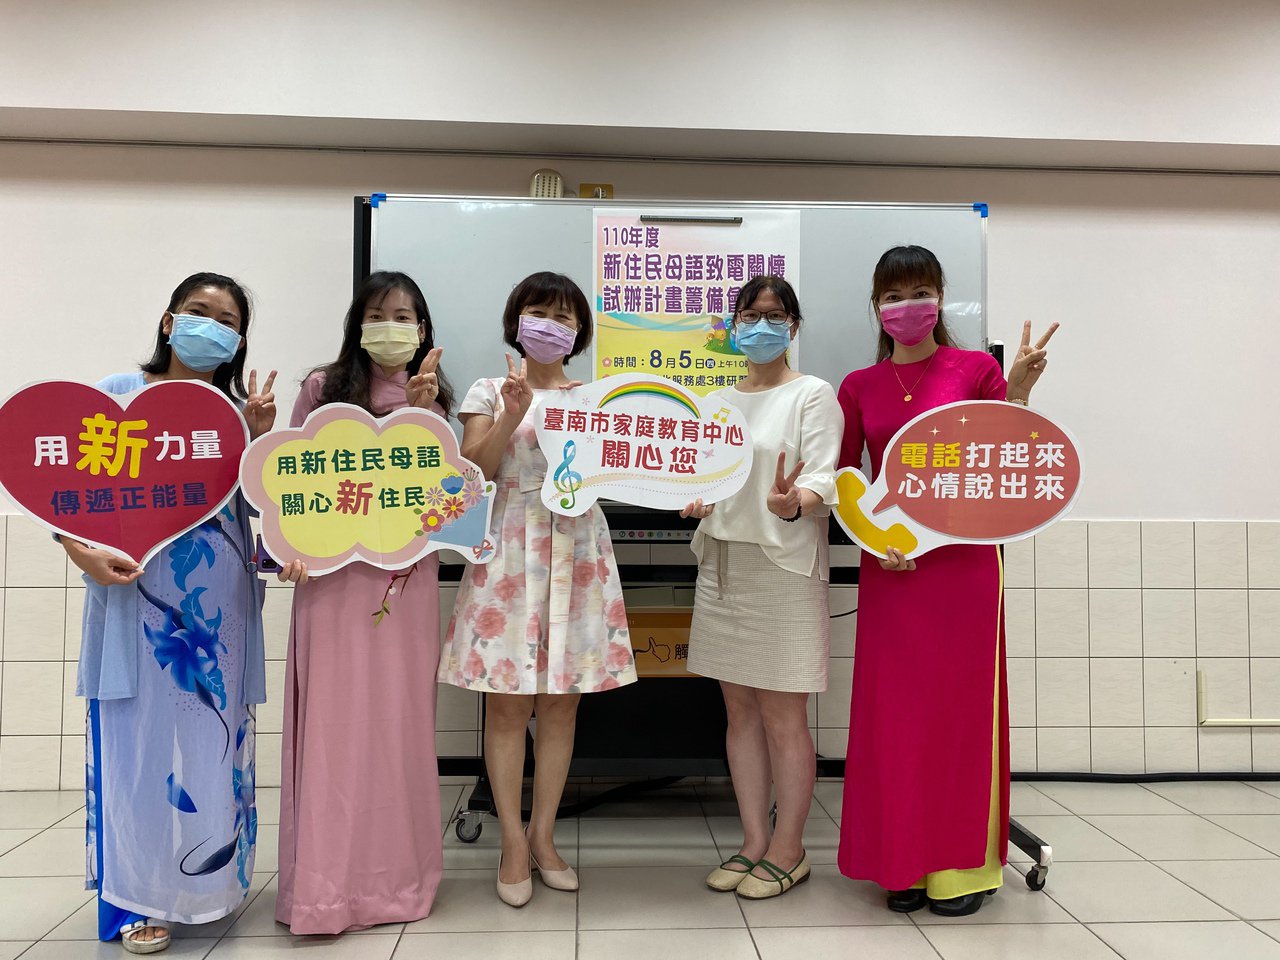 New immigrants use their native language to help relieve the homesickness of their fellow sisters. Photo/Provided by Tainan Education Center